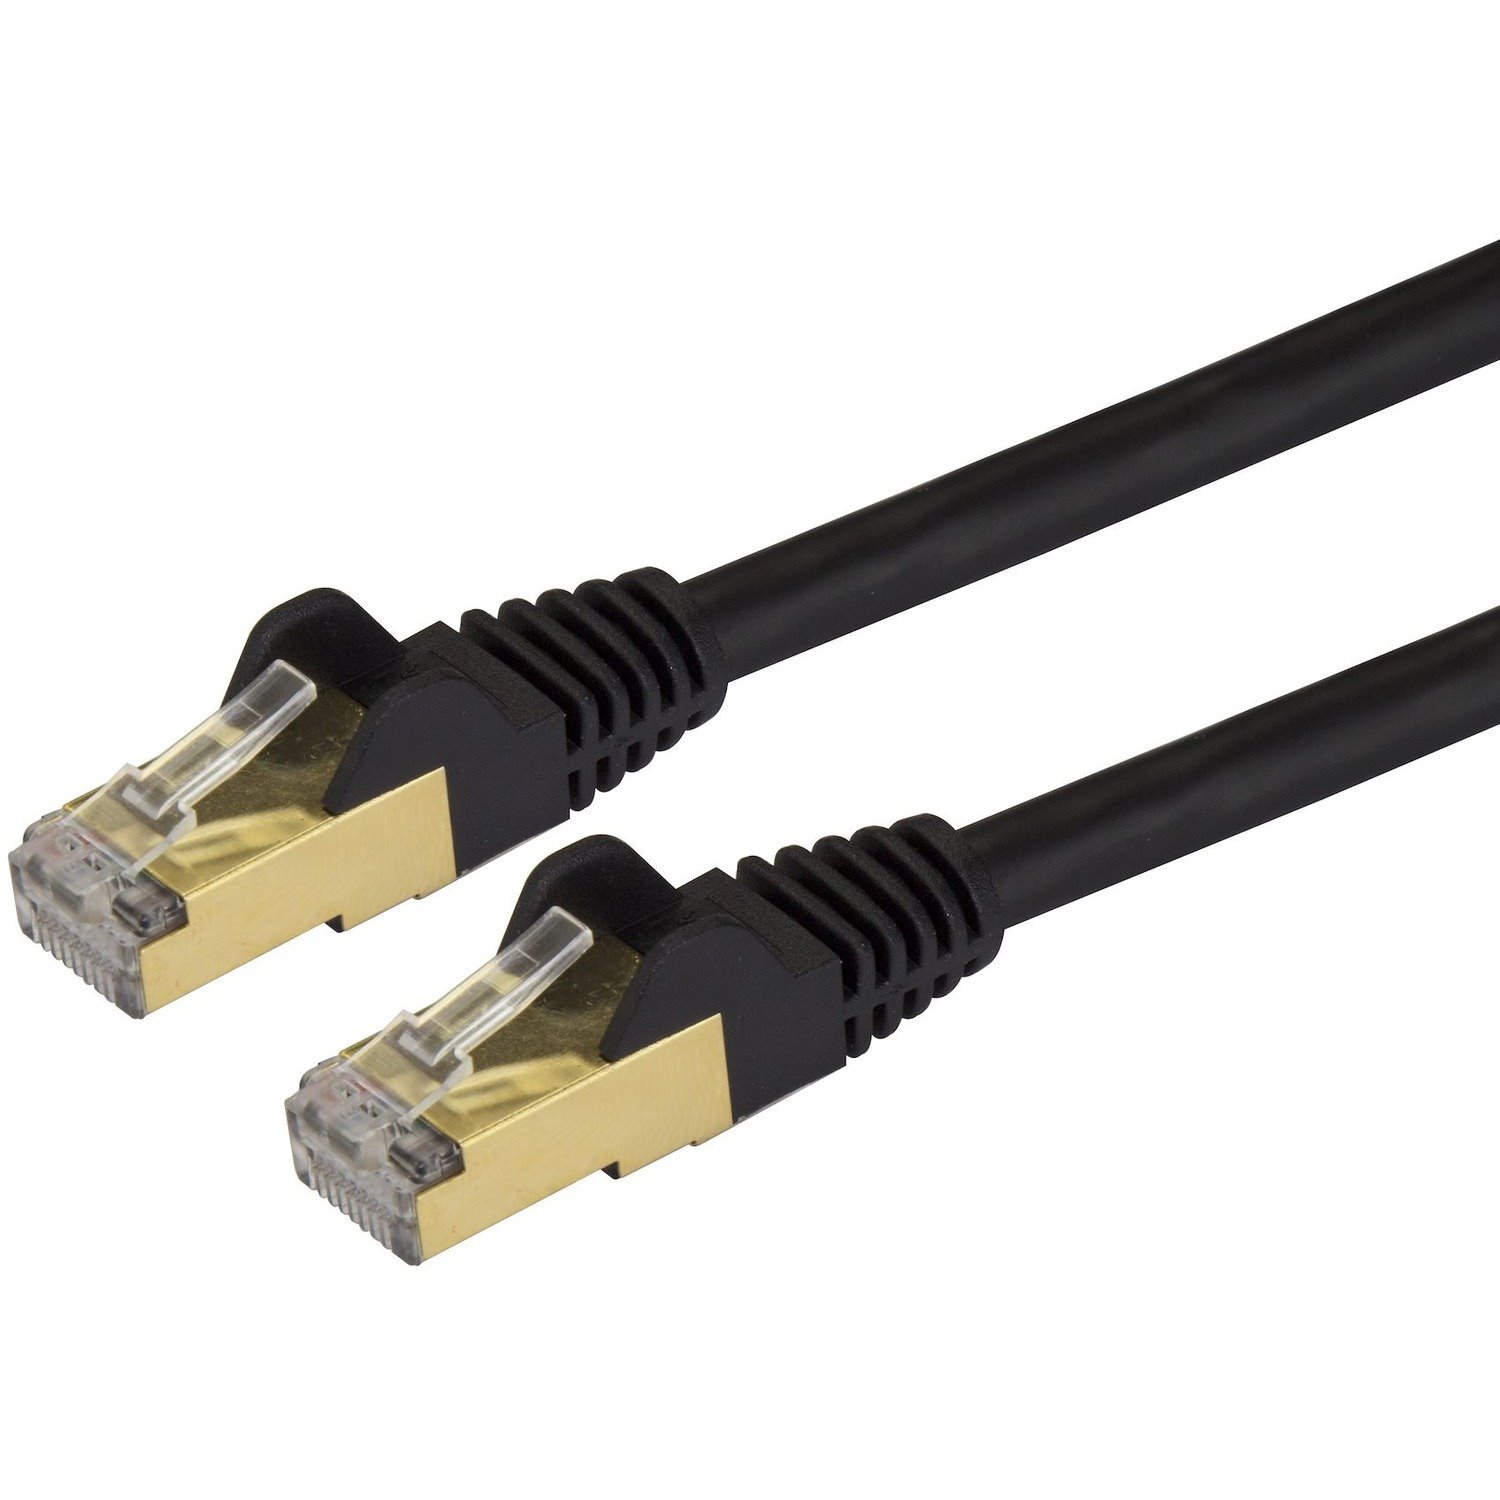 StarTech.com 91.44 cm Category 6a Network Cable for Network Device, Hub, Switch, Router, Print Server, Patch Panel, VoIP Device, PoE-enabled Device, Computer - 1